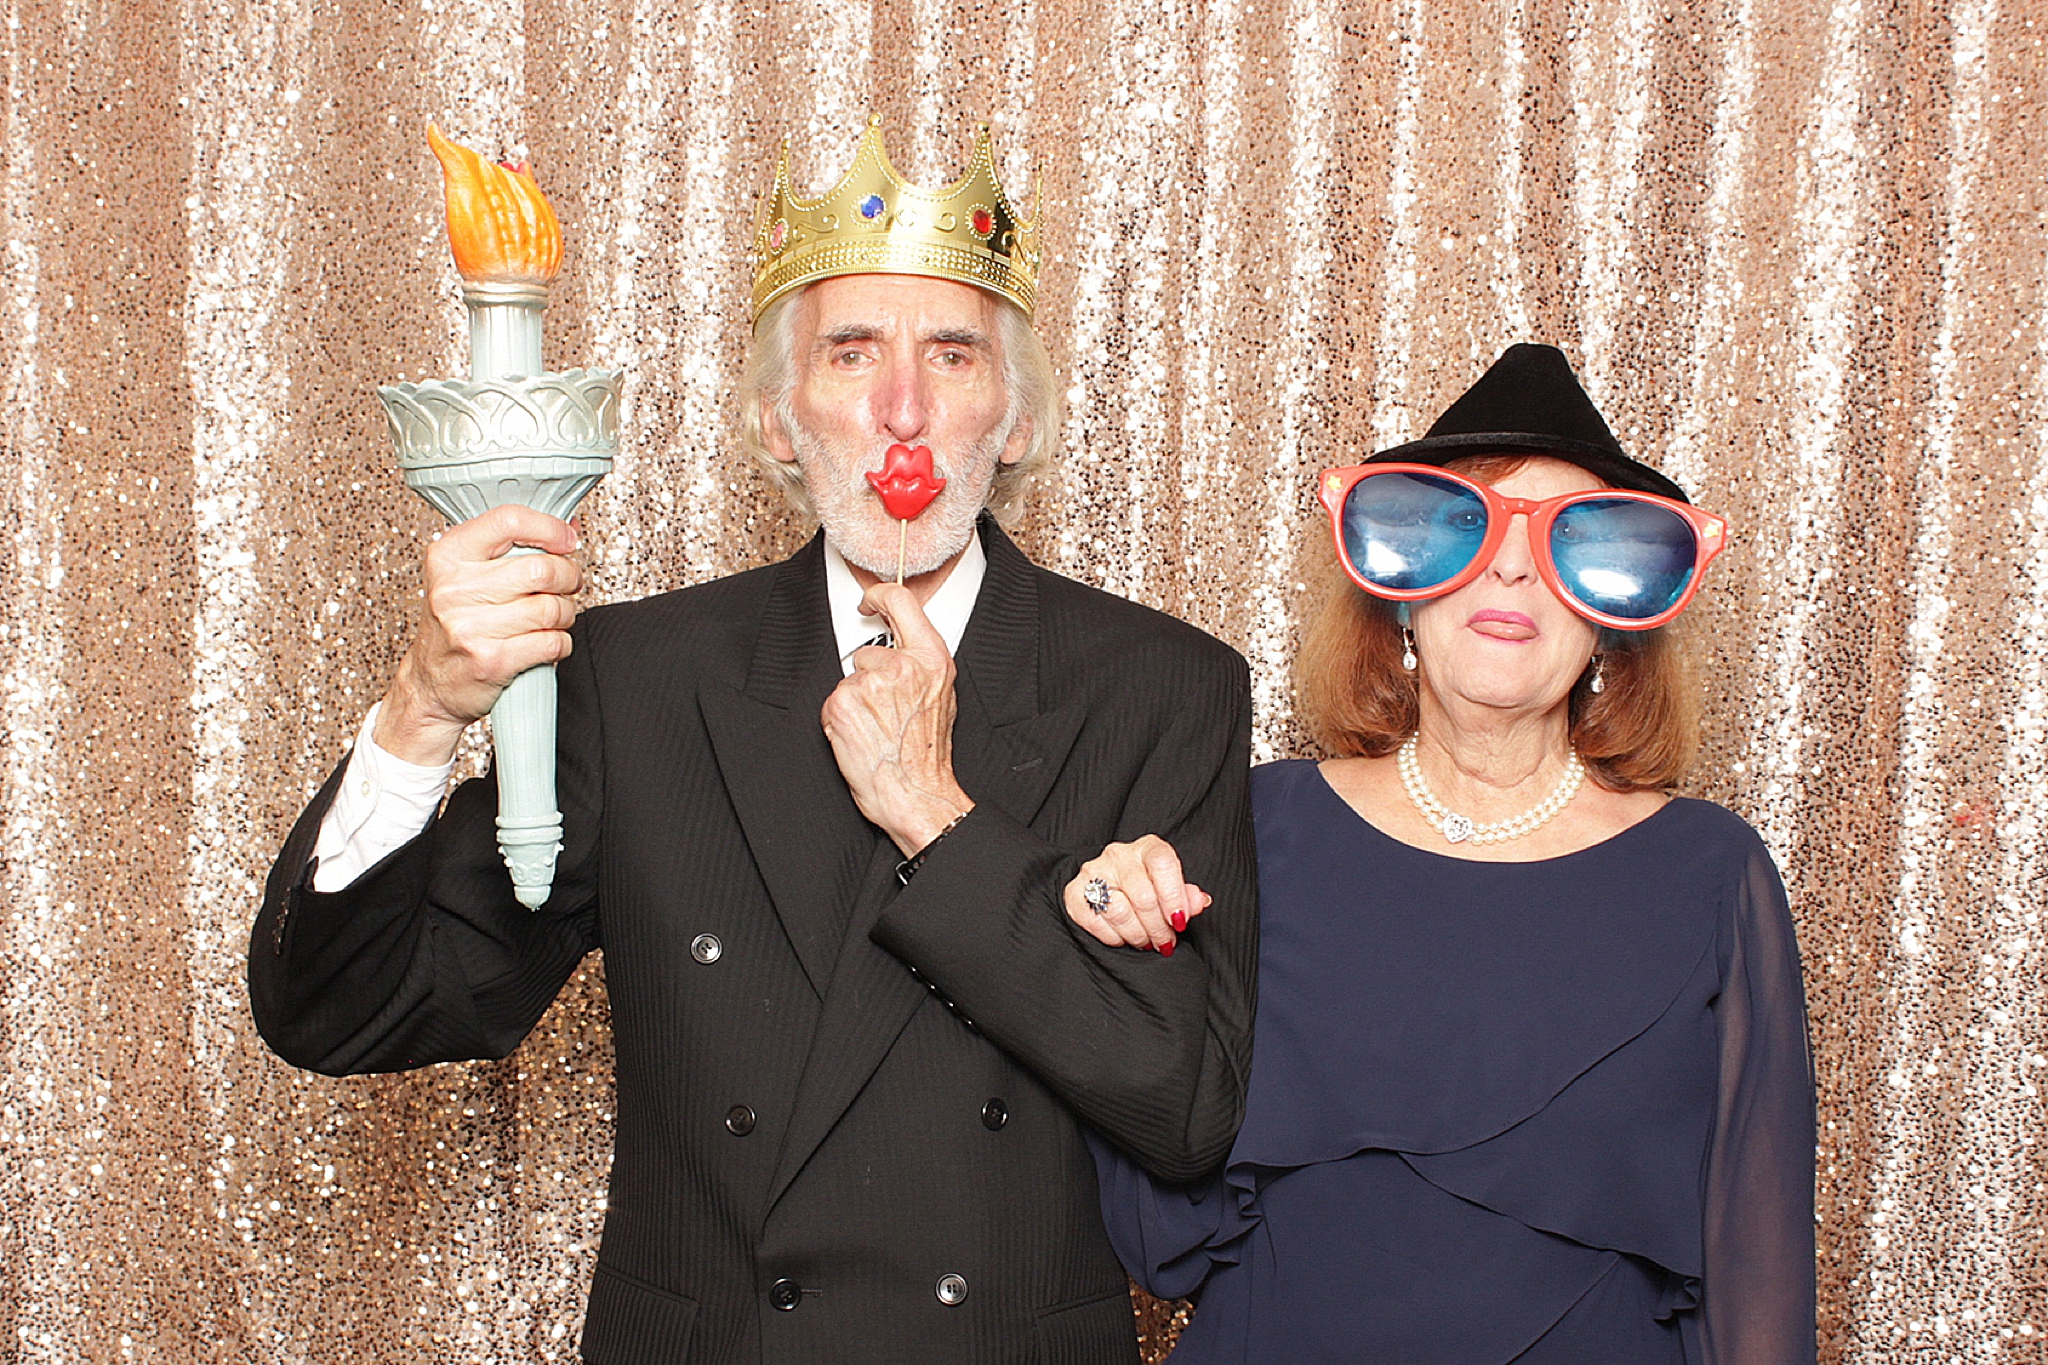 guests have fun during photo booth by Idalia Photography